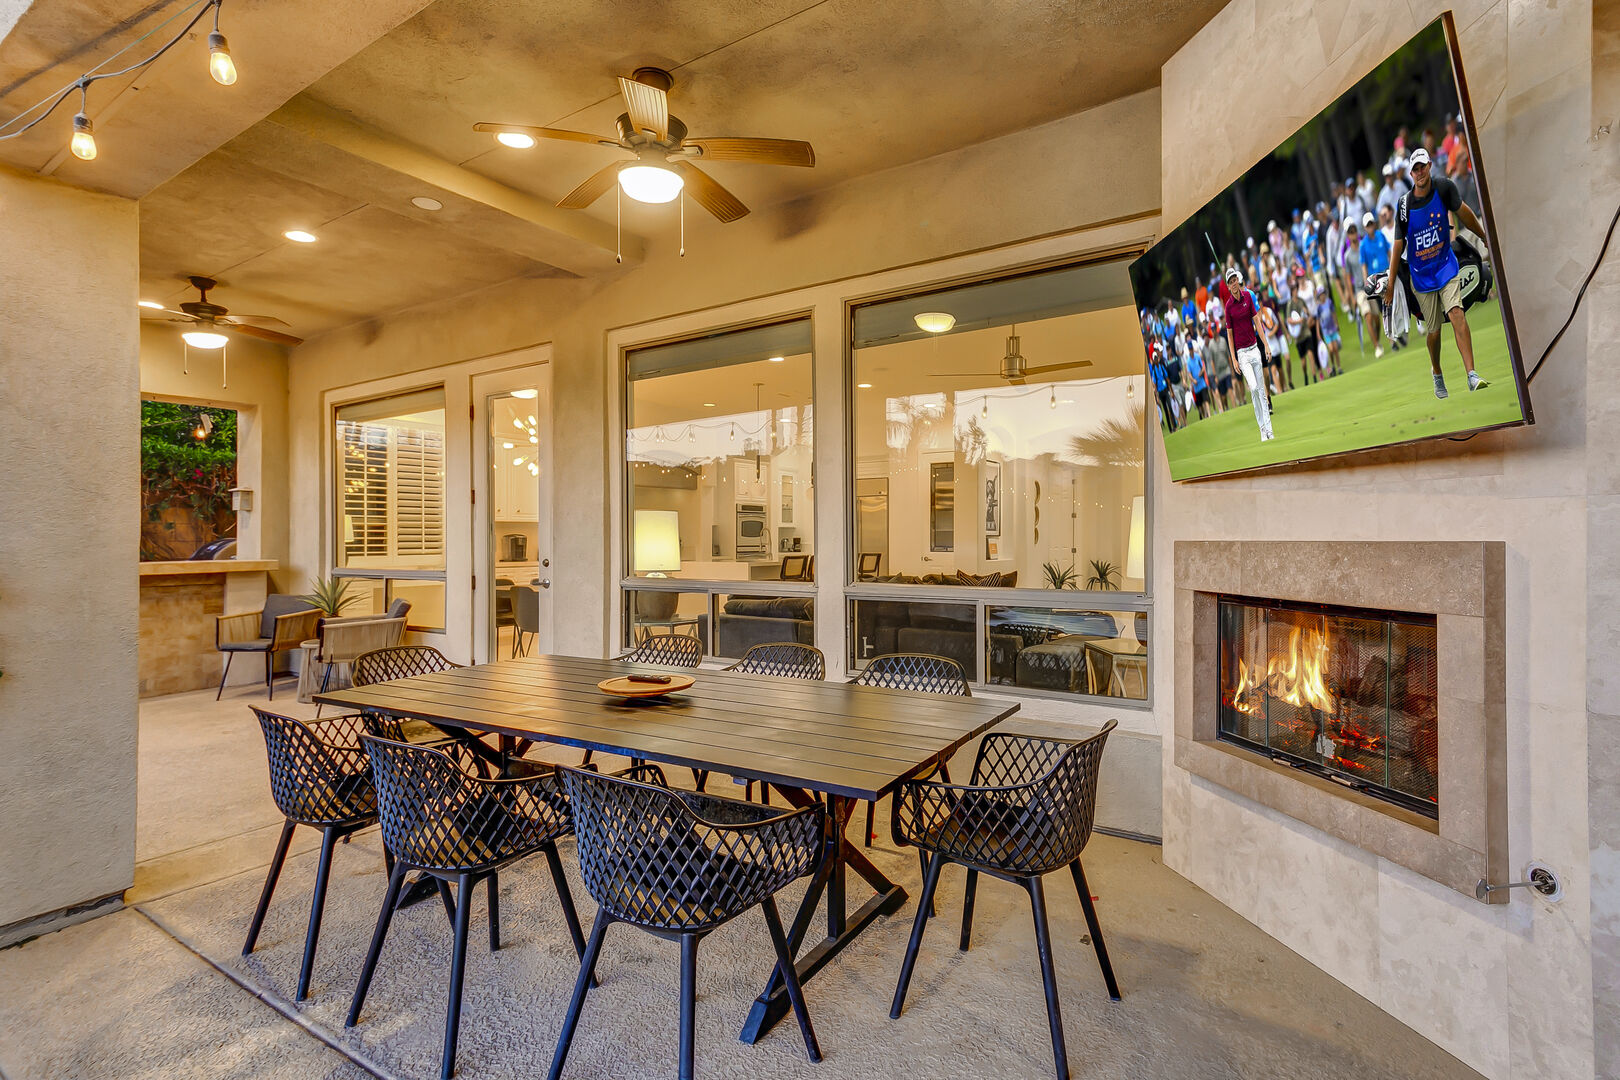 Dine by the outdoor fireplace on the patio dining table with seating for eight!